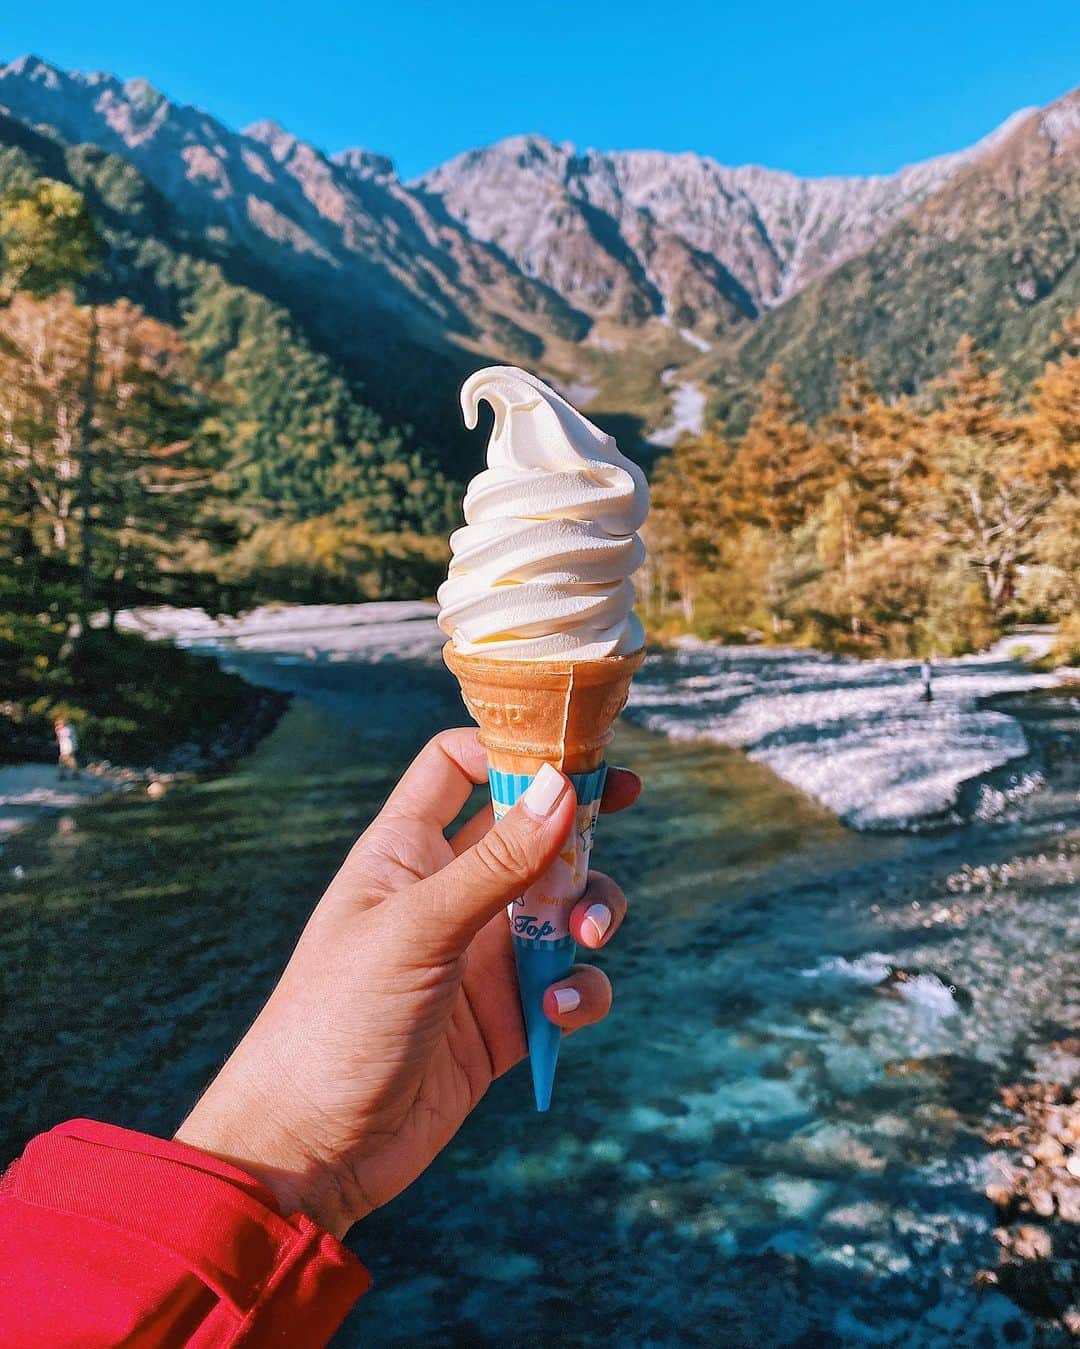 Girleatworldのインスタグラム：「🍦 MAJOR throwback to that ice cream treat at the end of my Kamikochi hike.  Some of you might have seen this on my IG story. Back in October, I went on a 2-day trek in Kamikochi, part of the Japanese Alps. Kamikochi is written as 上高地 in Kanji which literal meaning is “the place where gods descended”. And I can see why, it was beautiful!  During our hike, we stayed overnight at a mountain lodge before proceeding to hike up to Karasawa Hyutte for the beautiful autumn leaves. In total we walked 3 hours on the first day and hiked-walked for 12 hours on the second day. Not gonna lie - that second day was TOUGH. What really kept me going was thinking about this ice cream that I've spied on the minute we started our trek 😂😂 It might just look like a plain vanilla ice cream but don't be fooled! Vanilla ice creams in Japan taste so much better than it looks. Or maybe I was biased after that looong day. Or maybe it's bc I was almost 8 months pregnant at that time 😁  More info on the hike over at my blog - girleatworld.net - or click the link in my pf above ☝🏻 #shotoniphone #girleatworld #kamikochi #kappabashi #japan #🇯🇵」